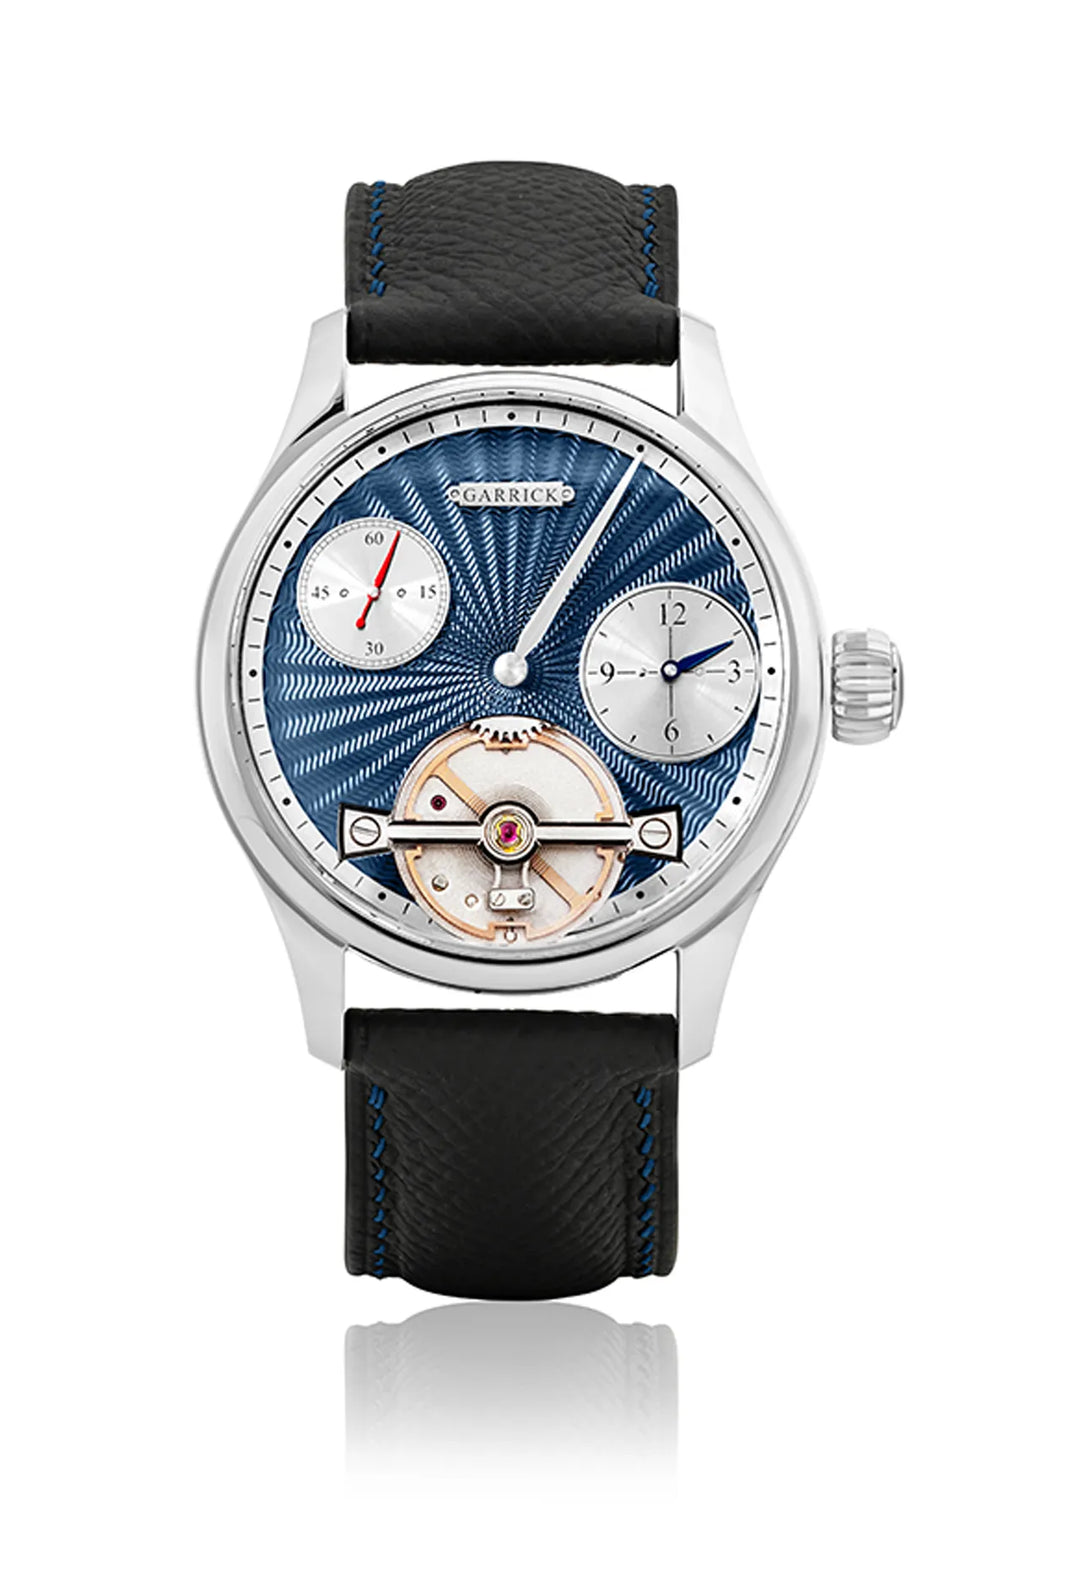 Handcrafted English made Regulator watch by Garrick Watchmakers